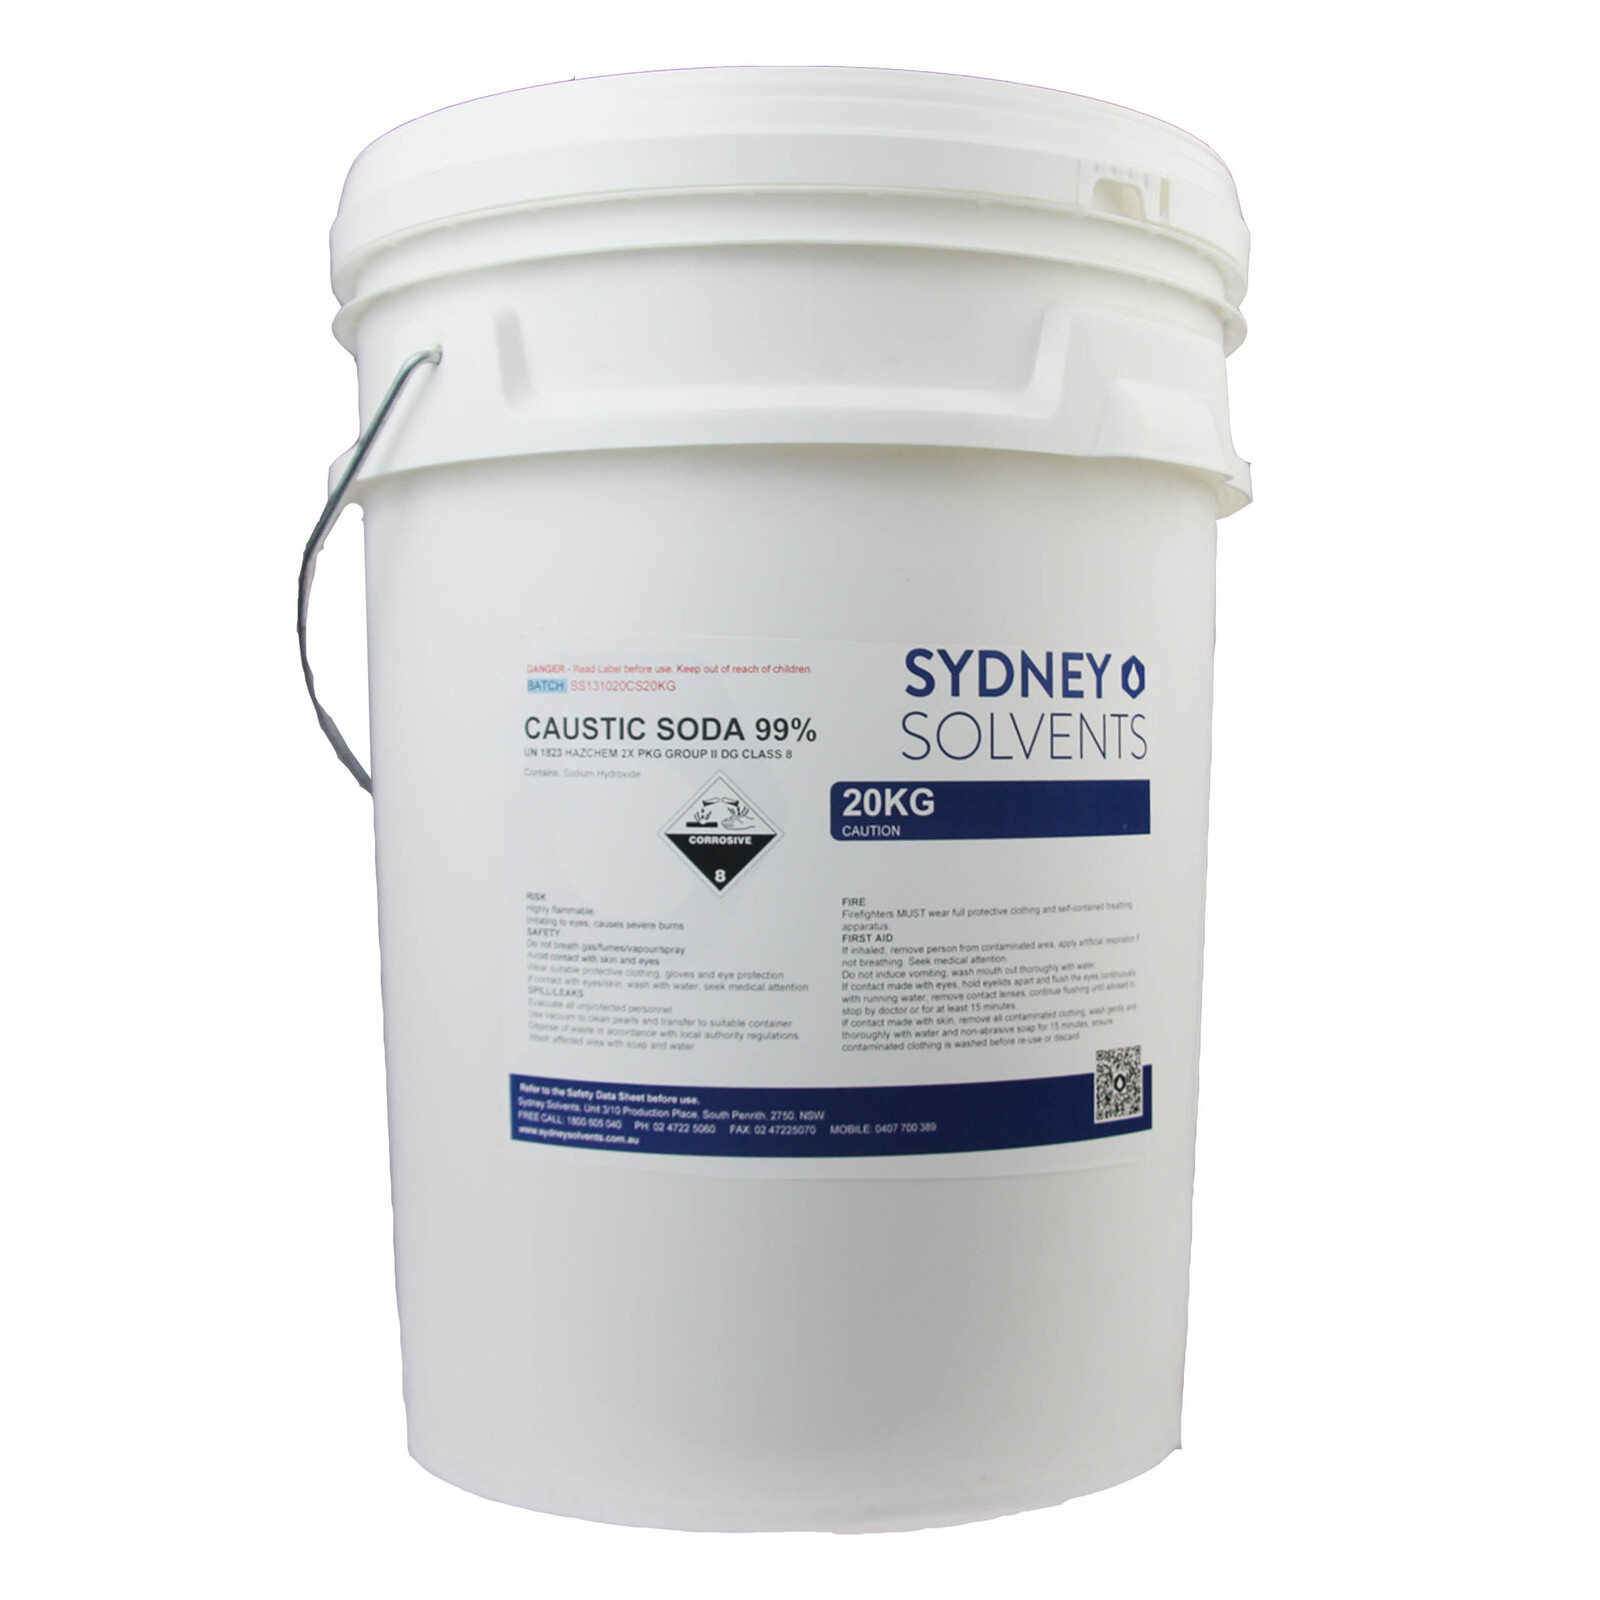 Sodium Hydroxide CAUSTIC SODA 99% – for soap making, buy from UK